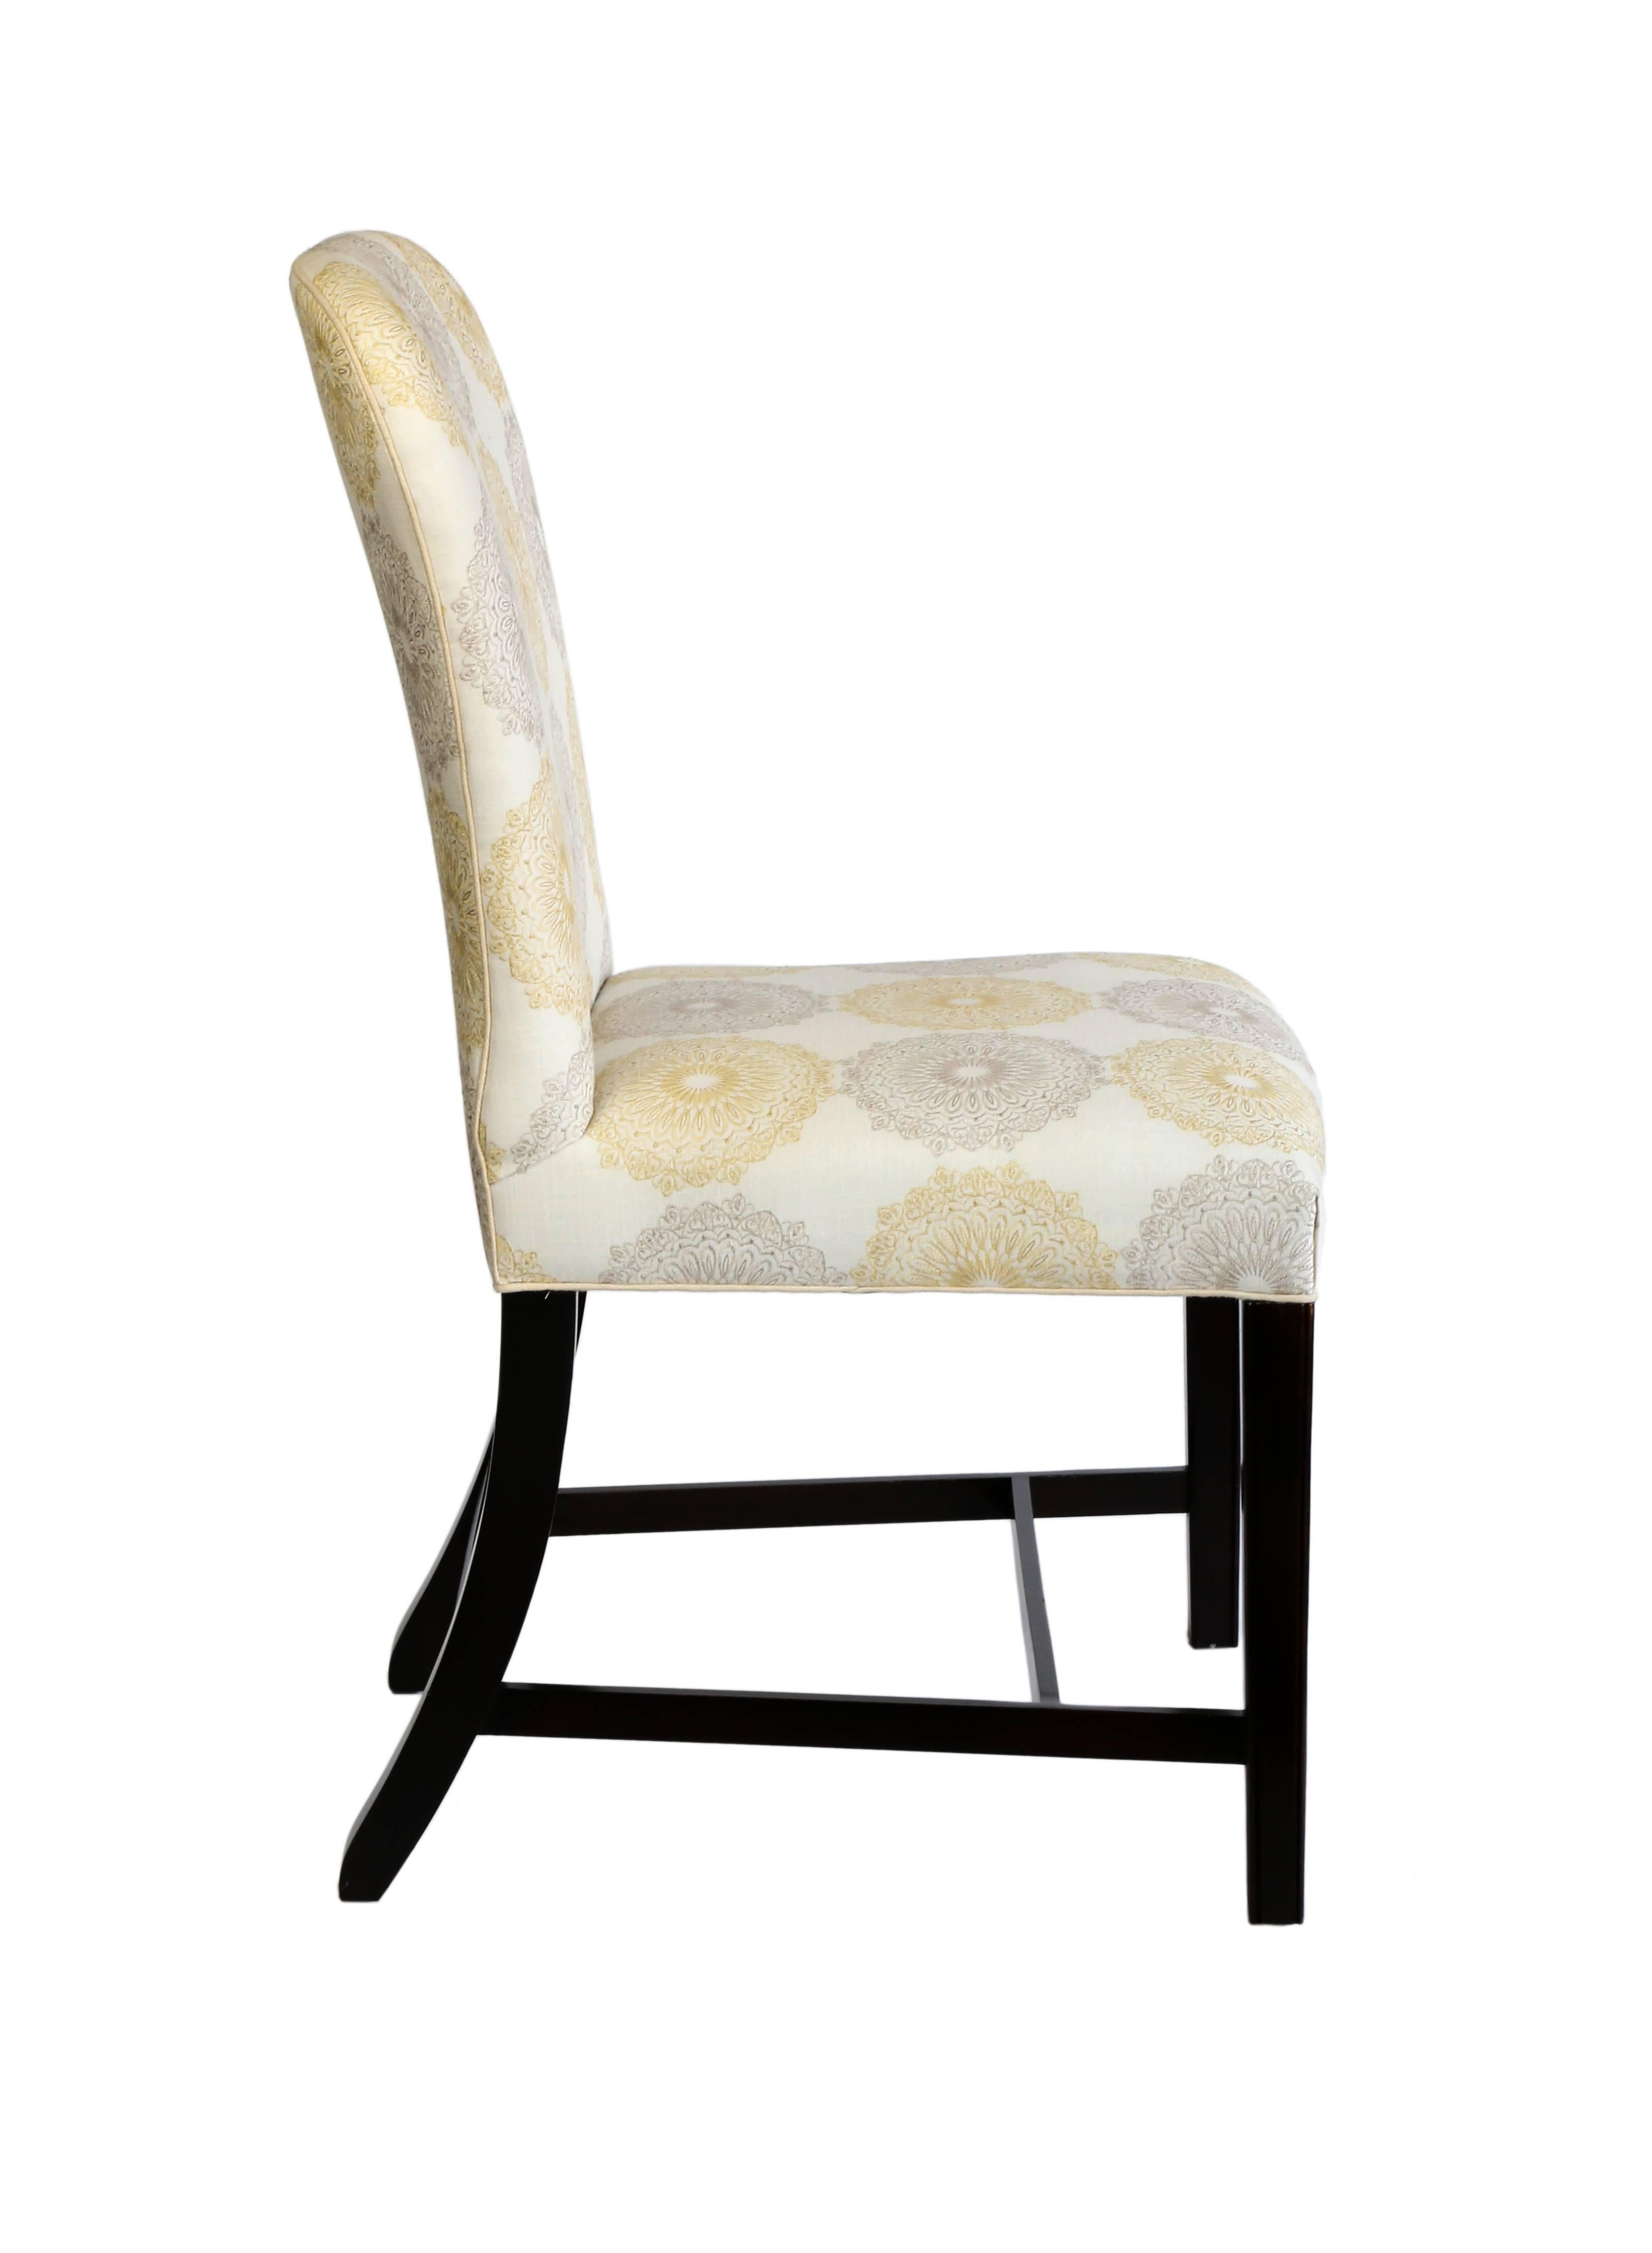 Ten upholstered side chairs with a dark mahogany finish on the legs and stretcher.